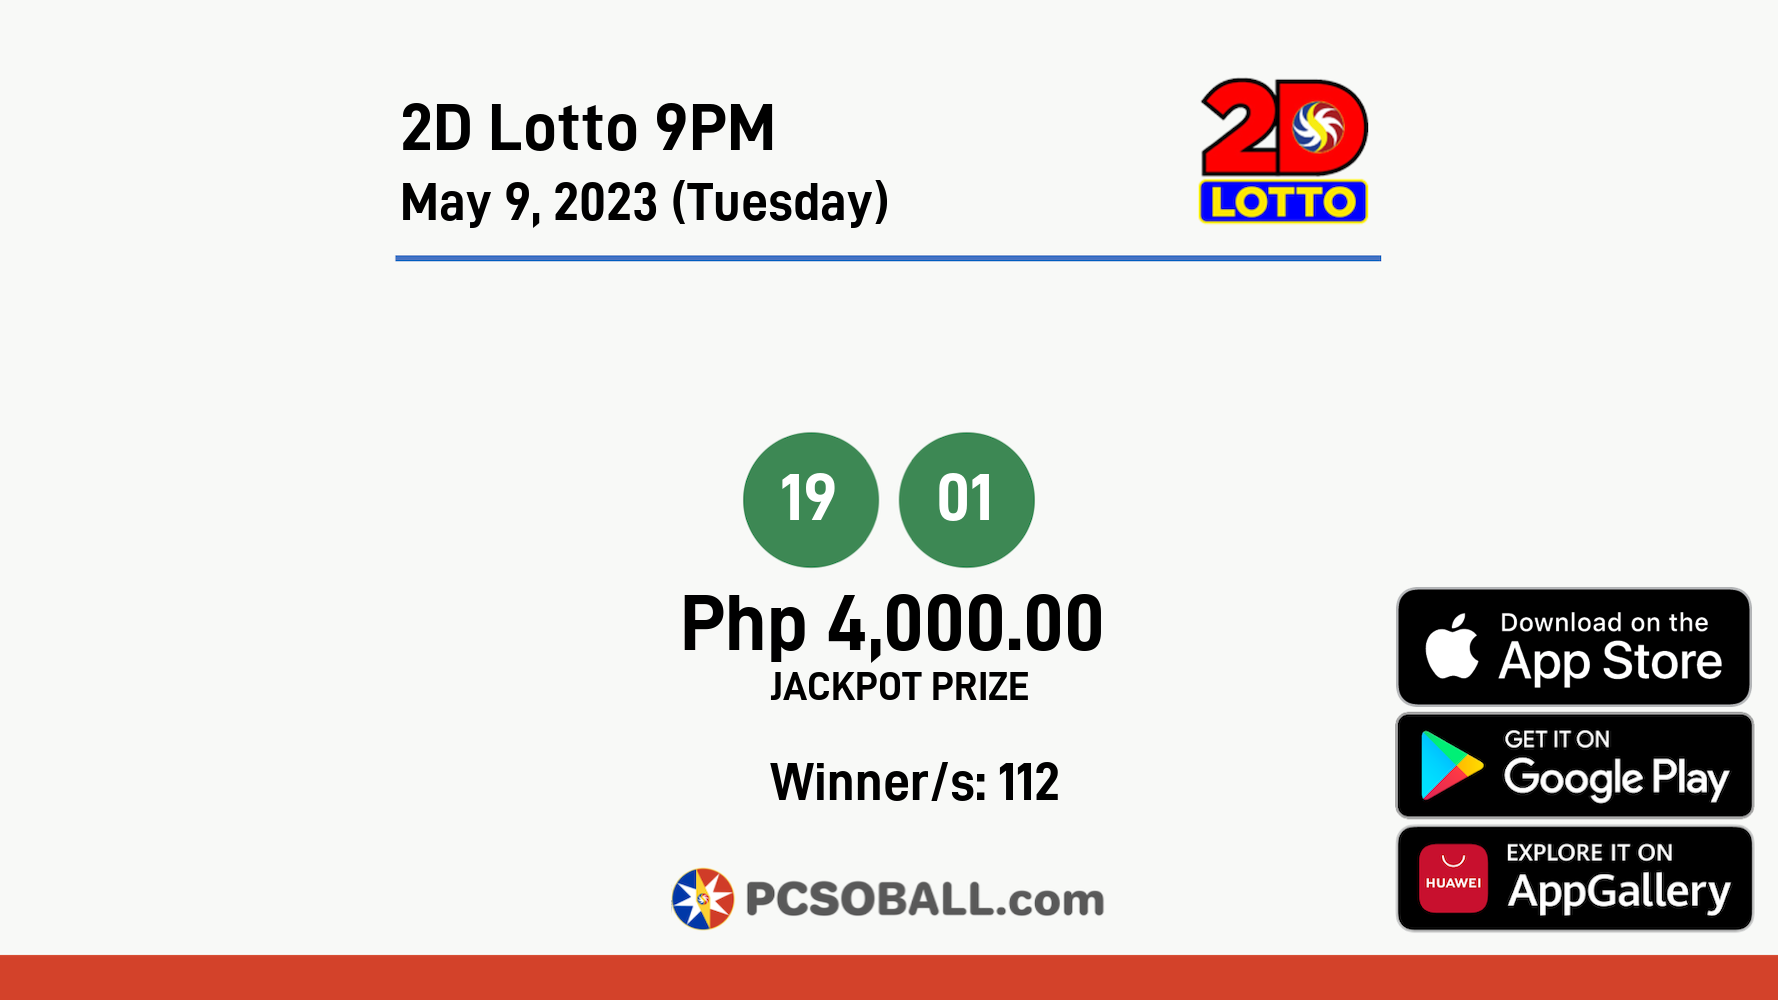 2D Lotto 9PM May 9, 2023 (Tuesday) Result